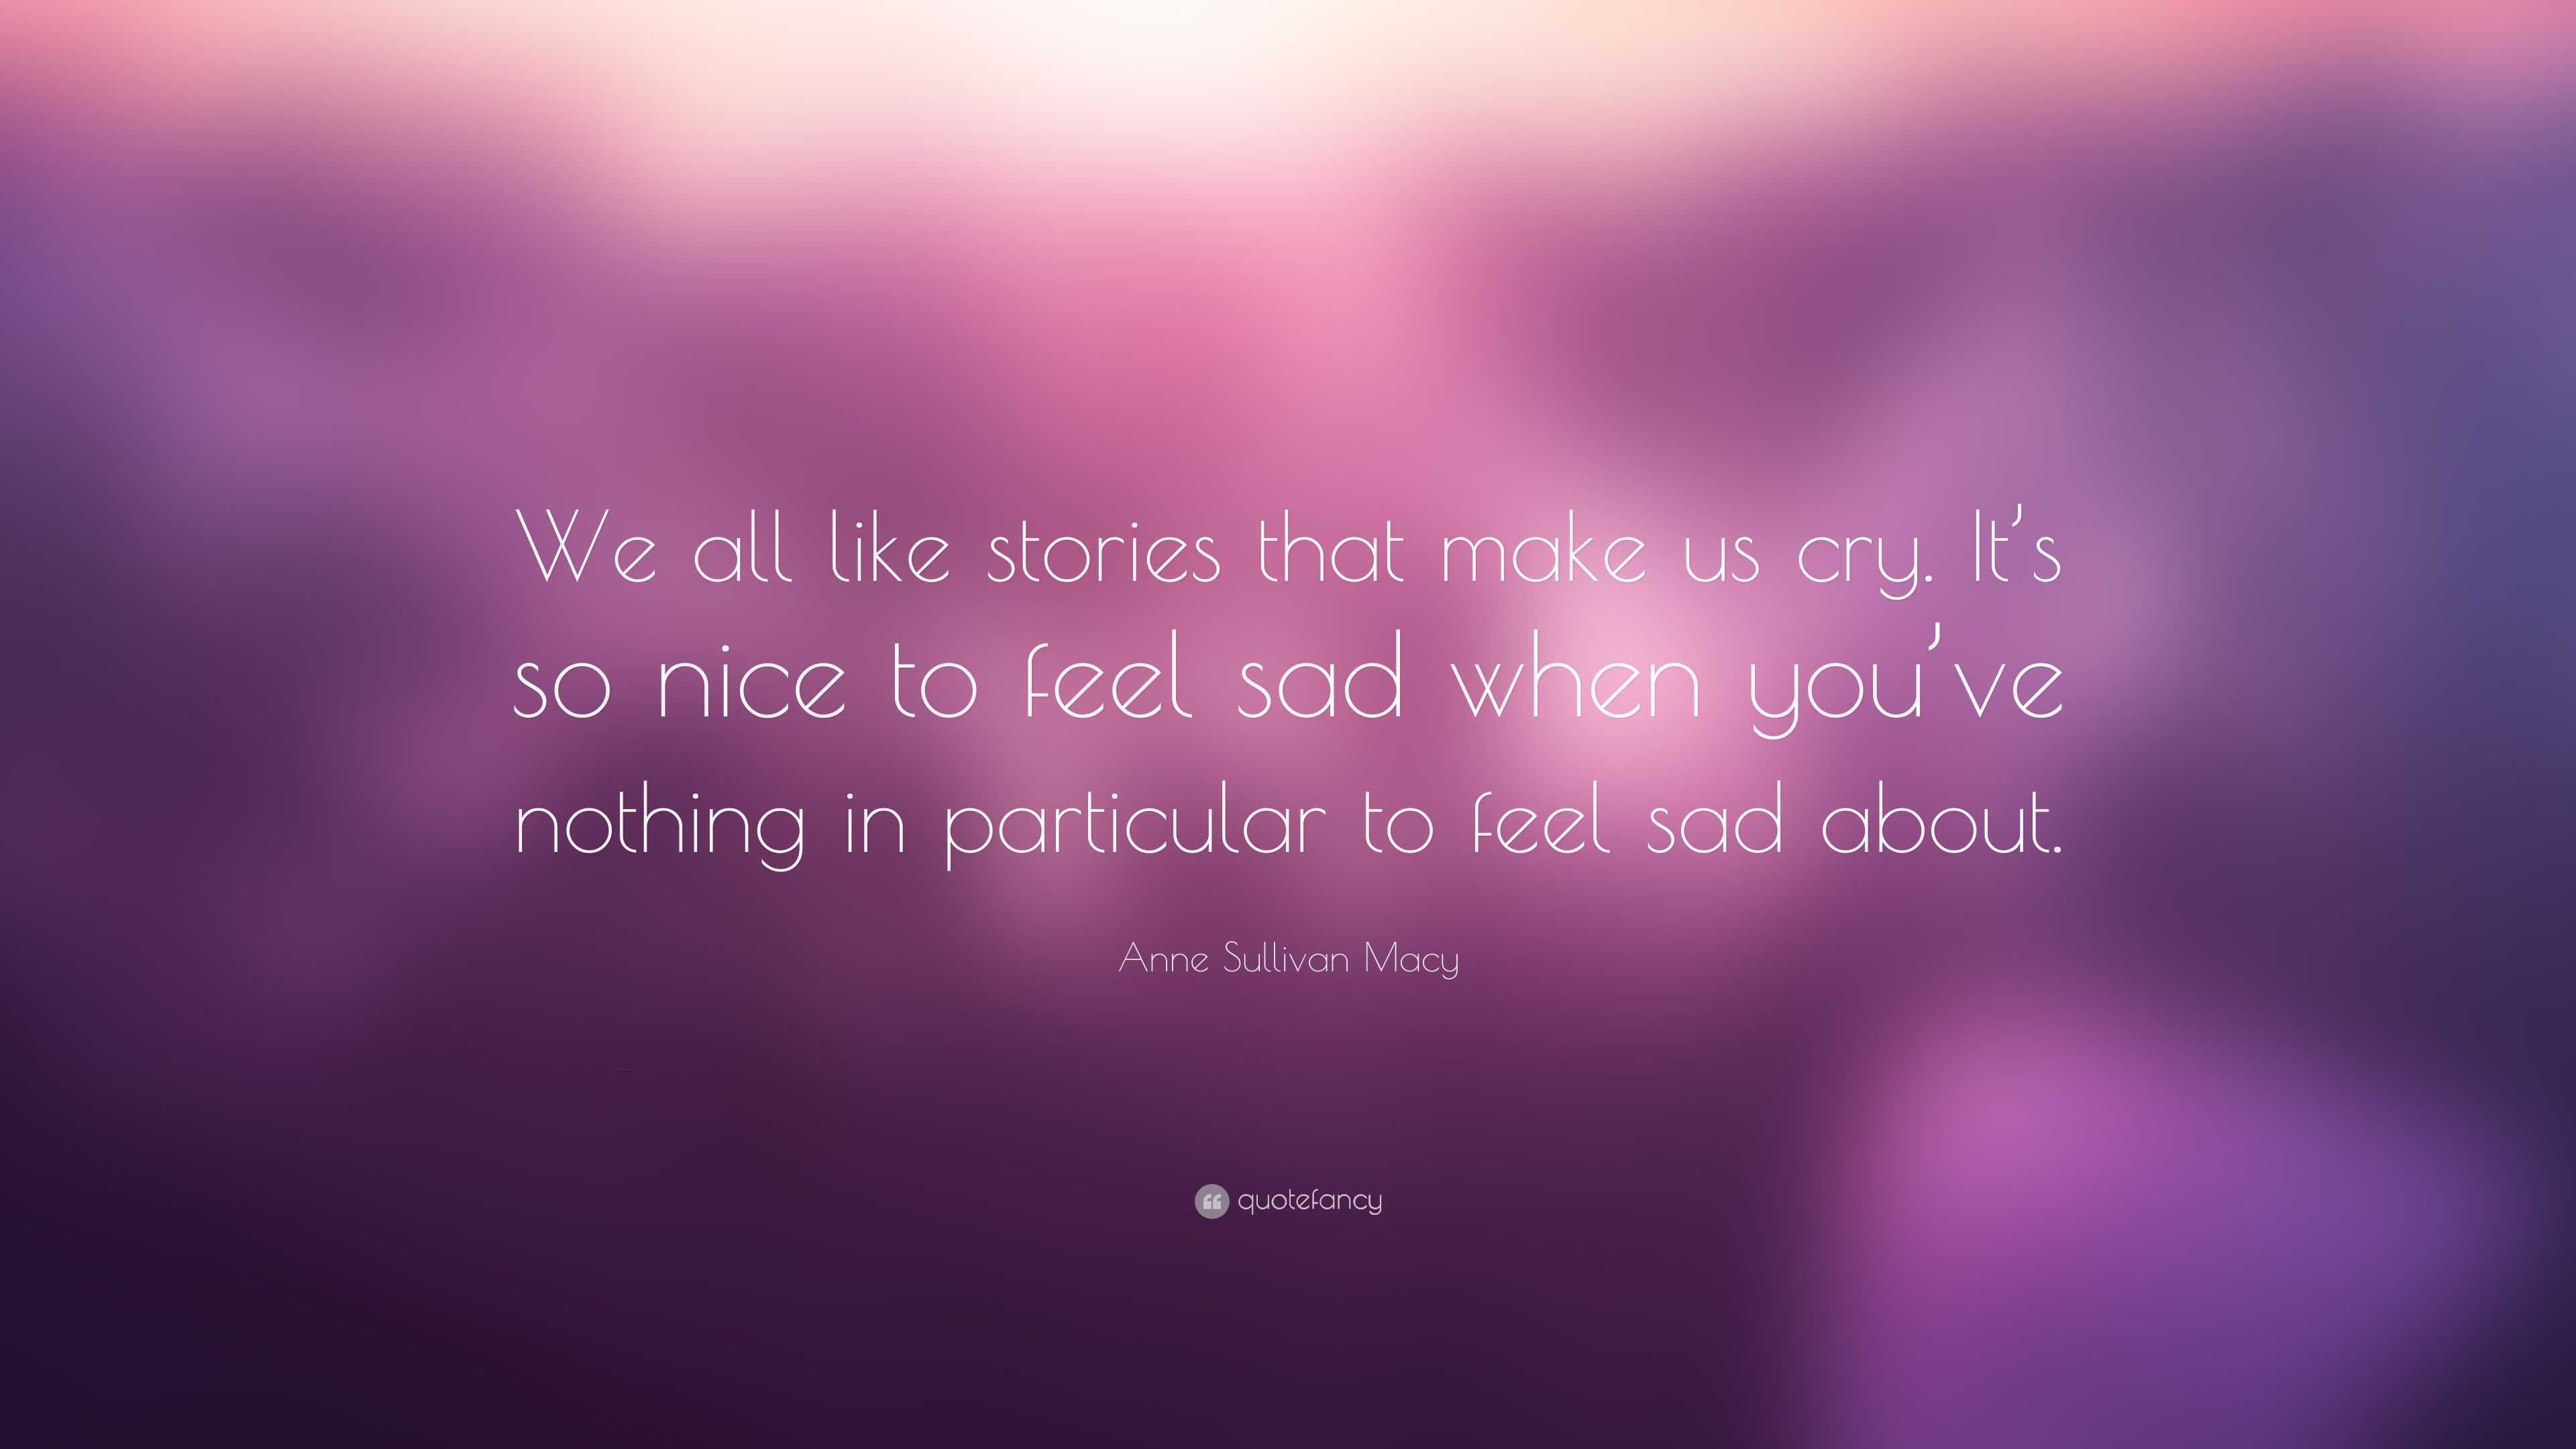 Anne Sullivan Macy Quote: “We all like stories that make us cry. It’s ...